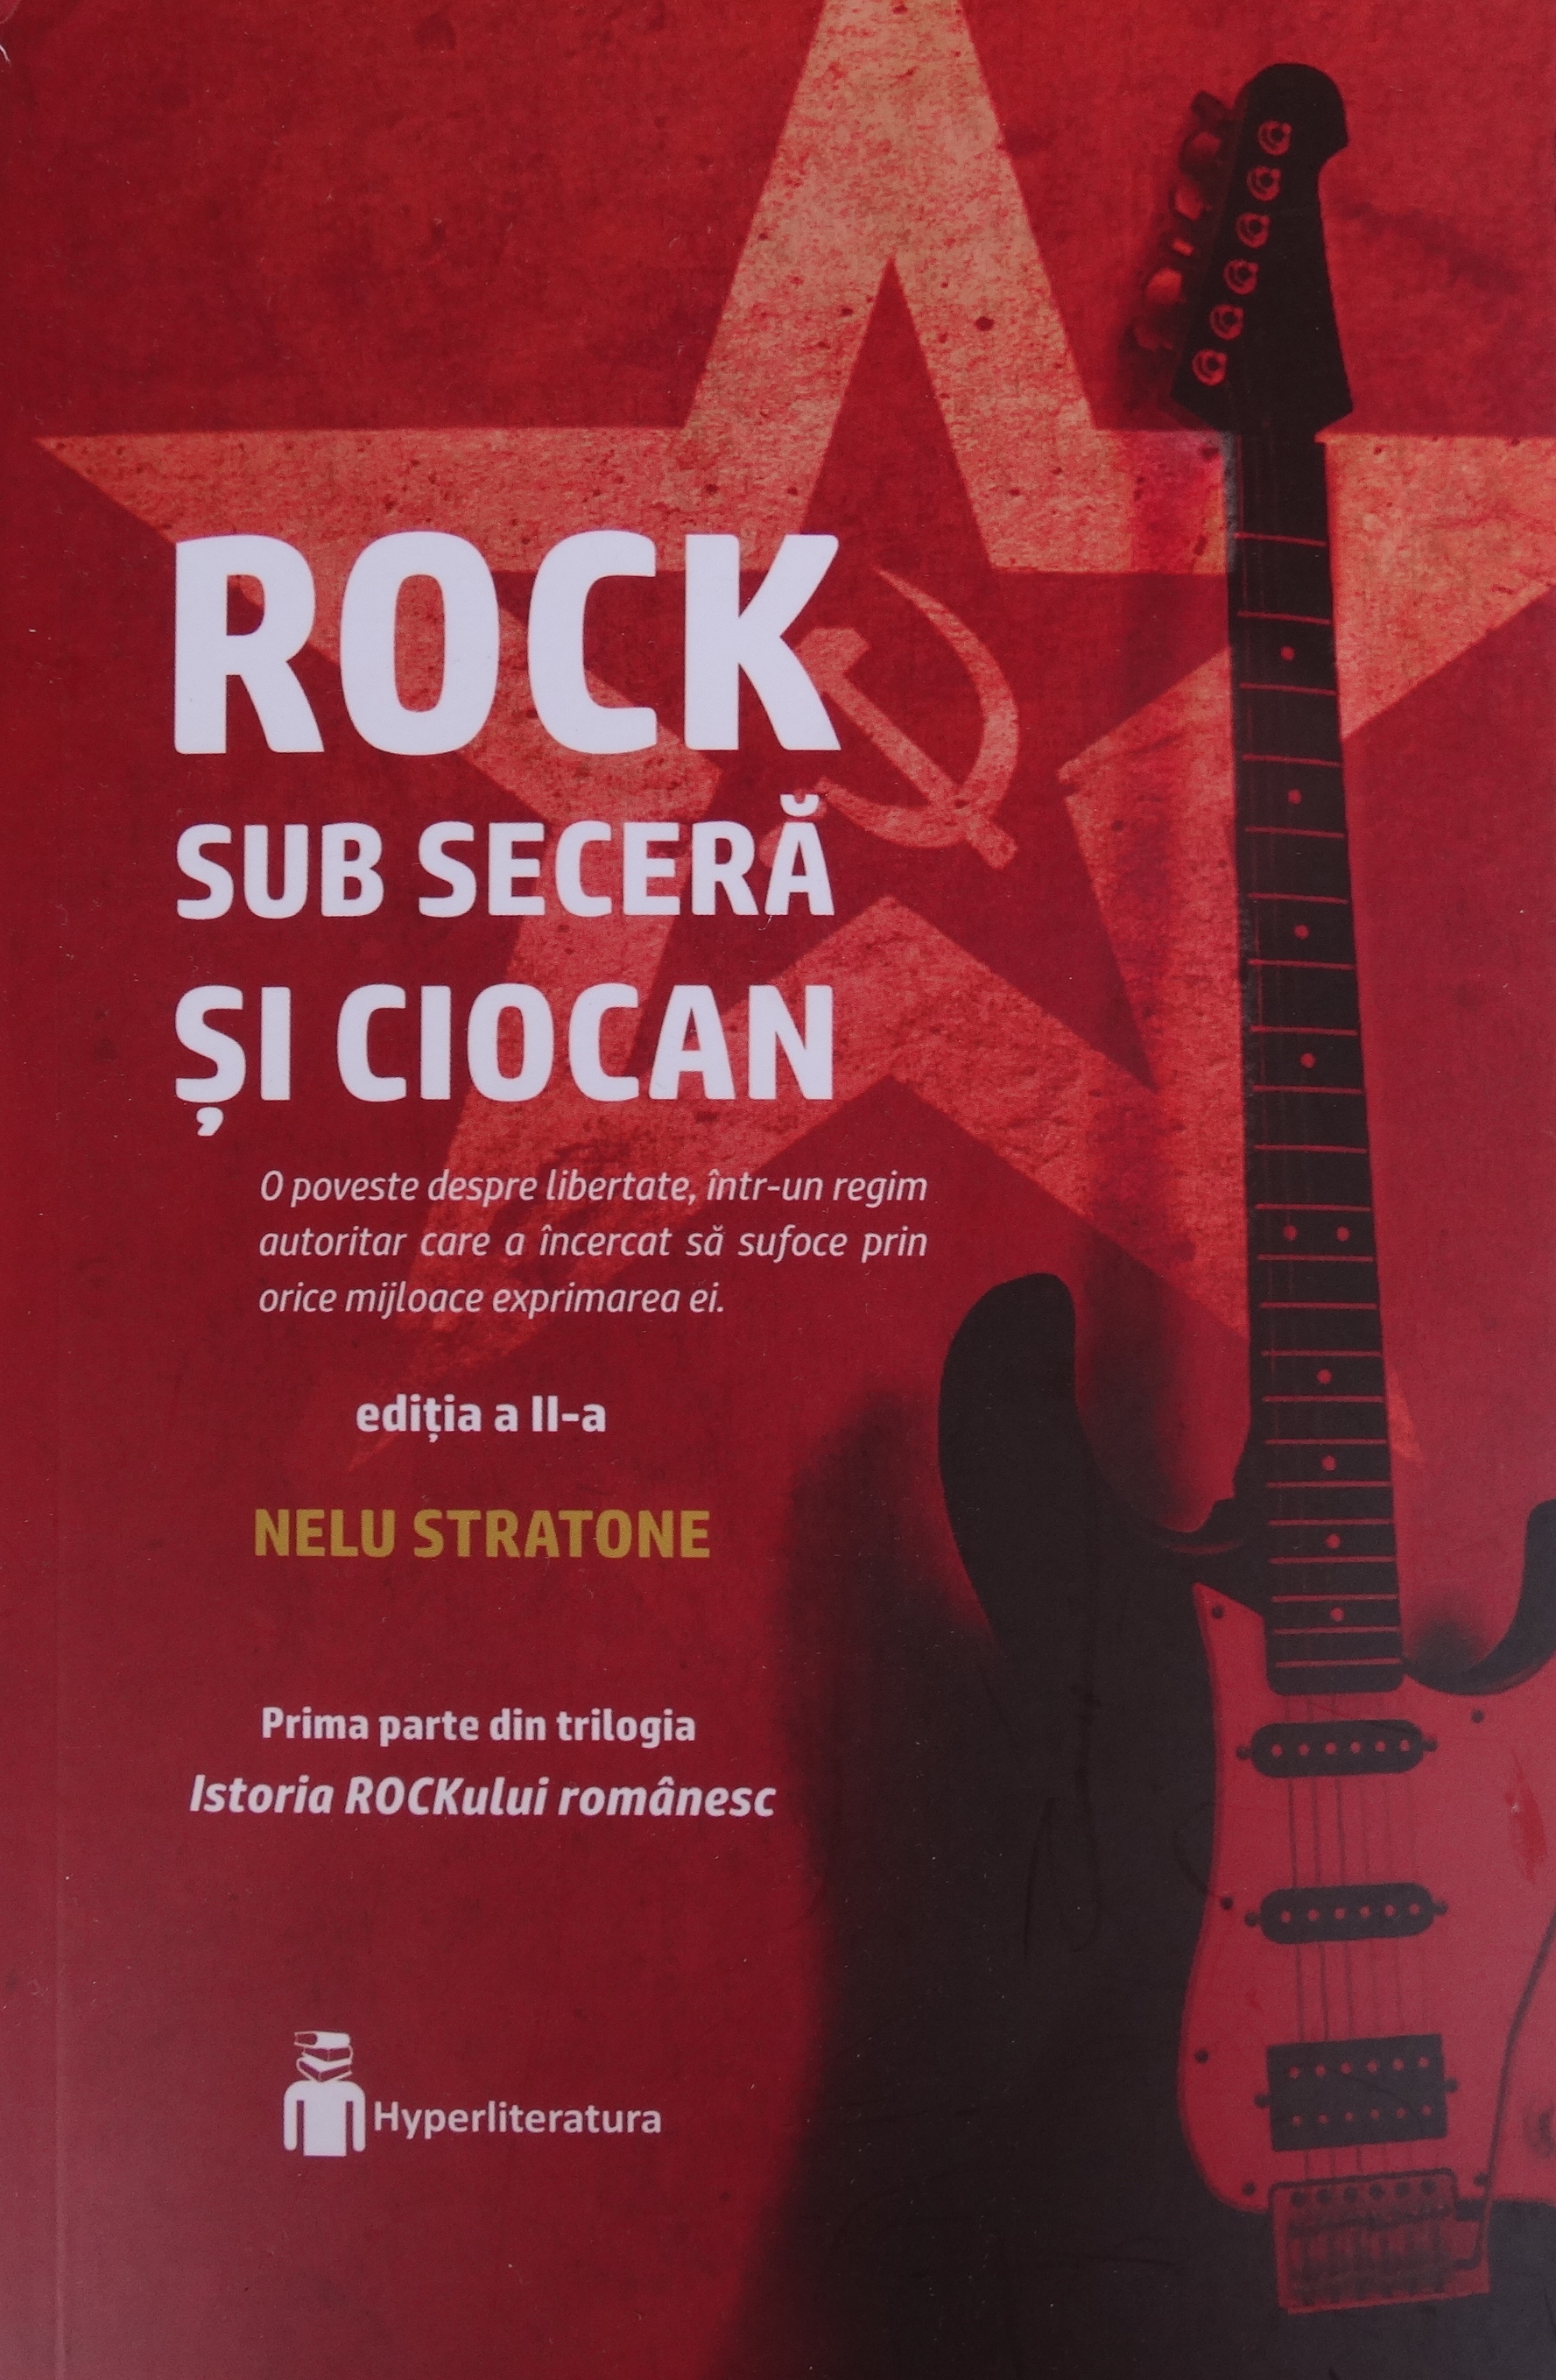 Front cover of the volume Rock under hammer and sickle by Nelu Stratone